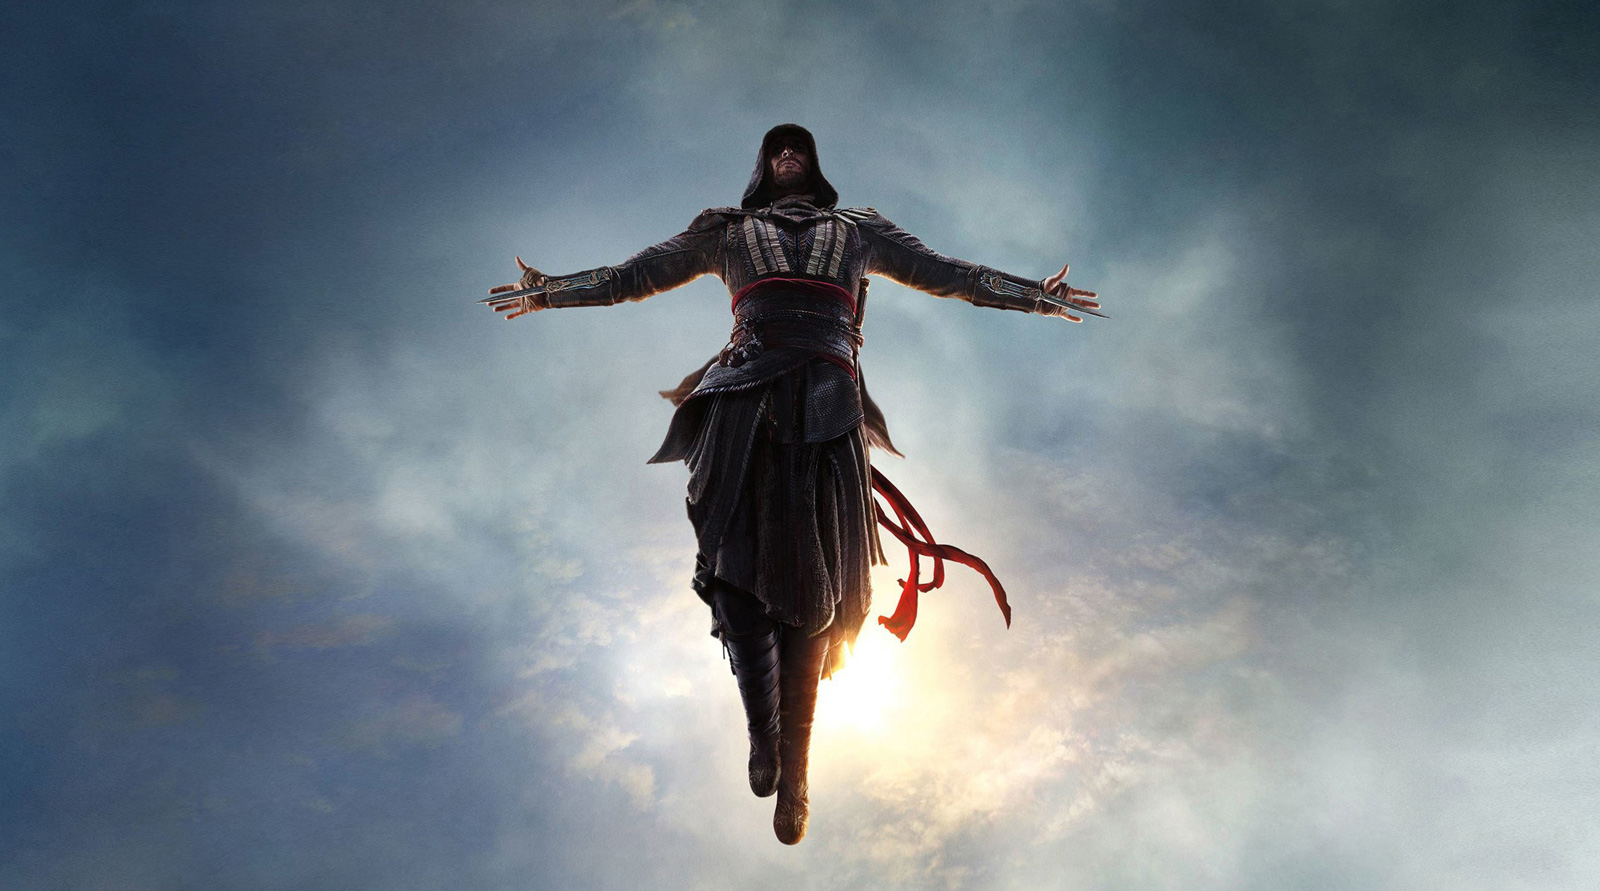 Assassin's Creed Official Trailer 2 (2016) - Michael Fassbender